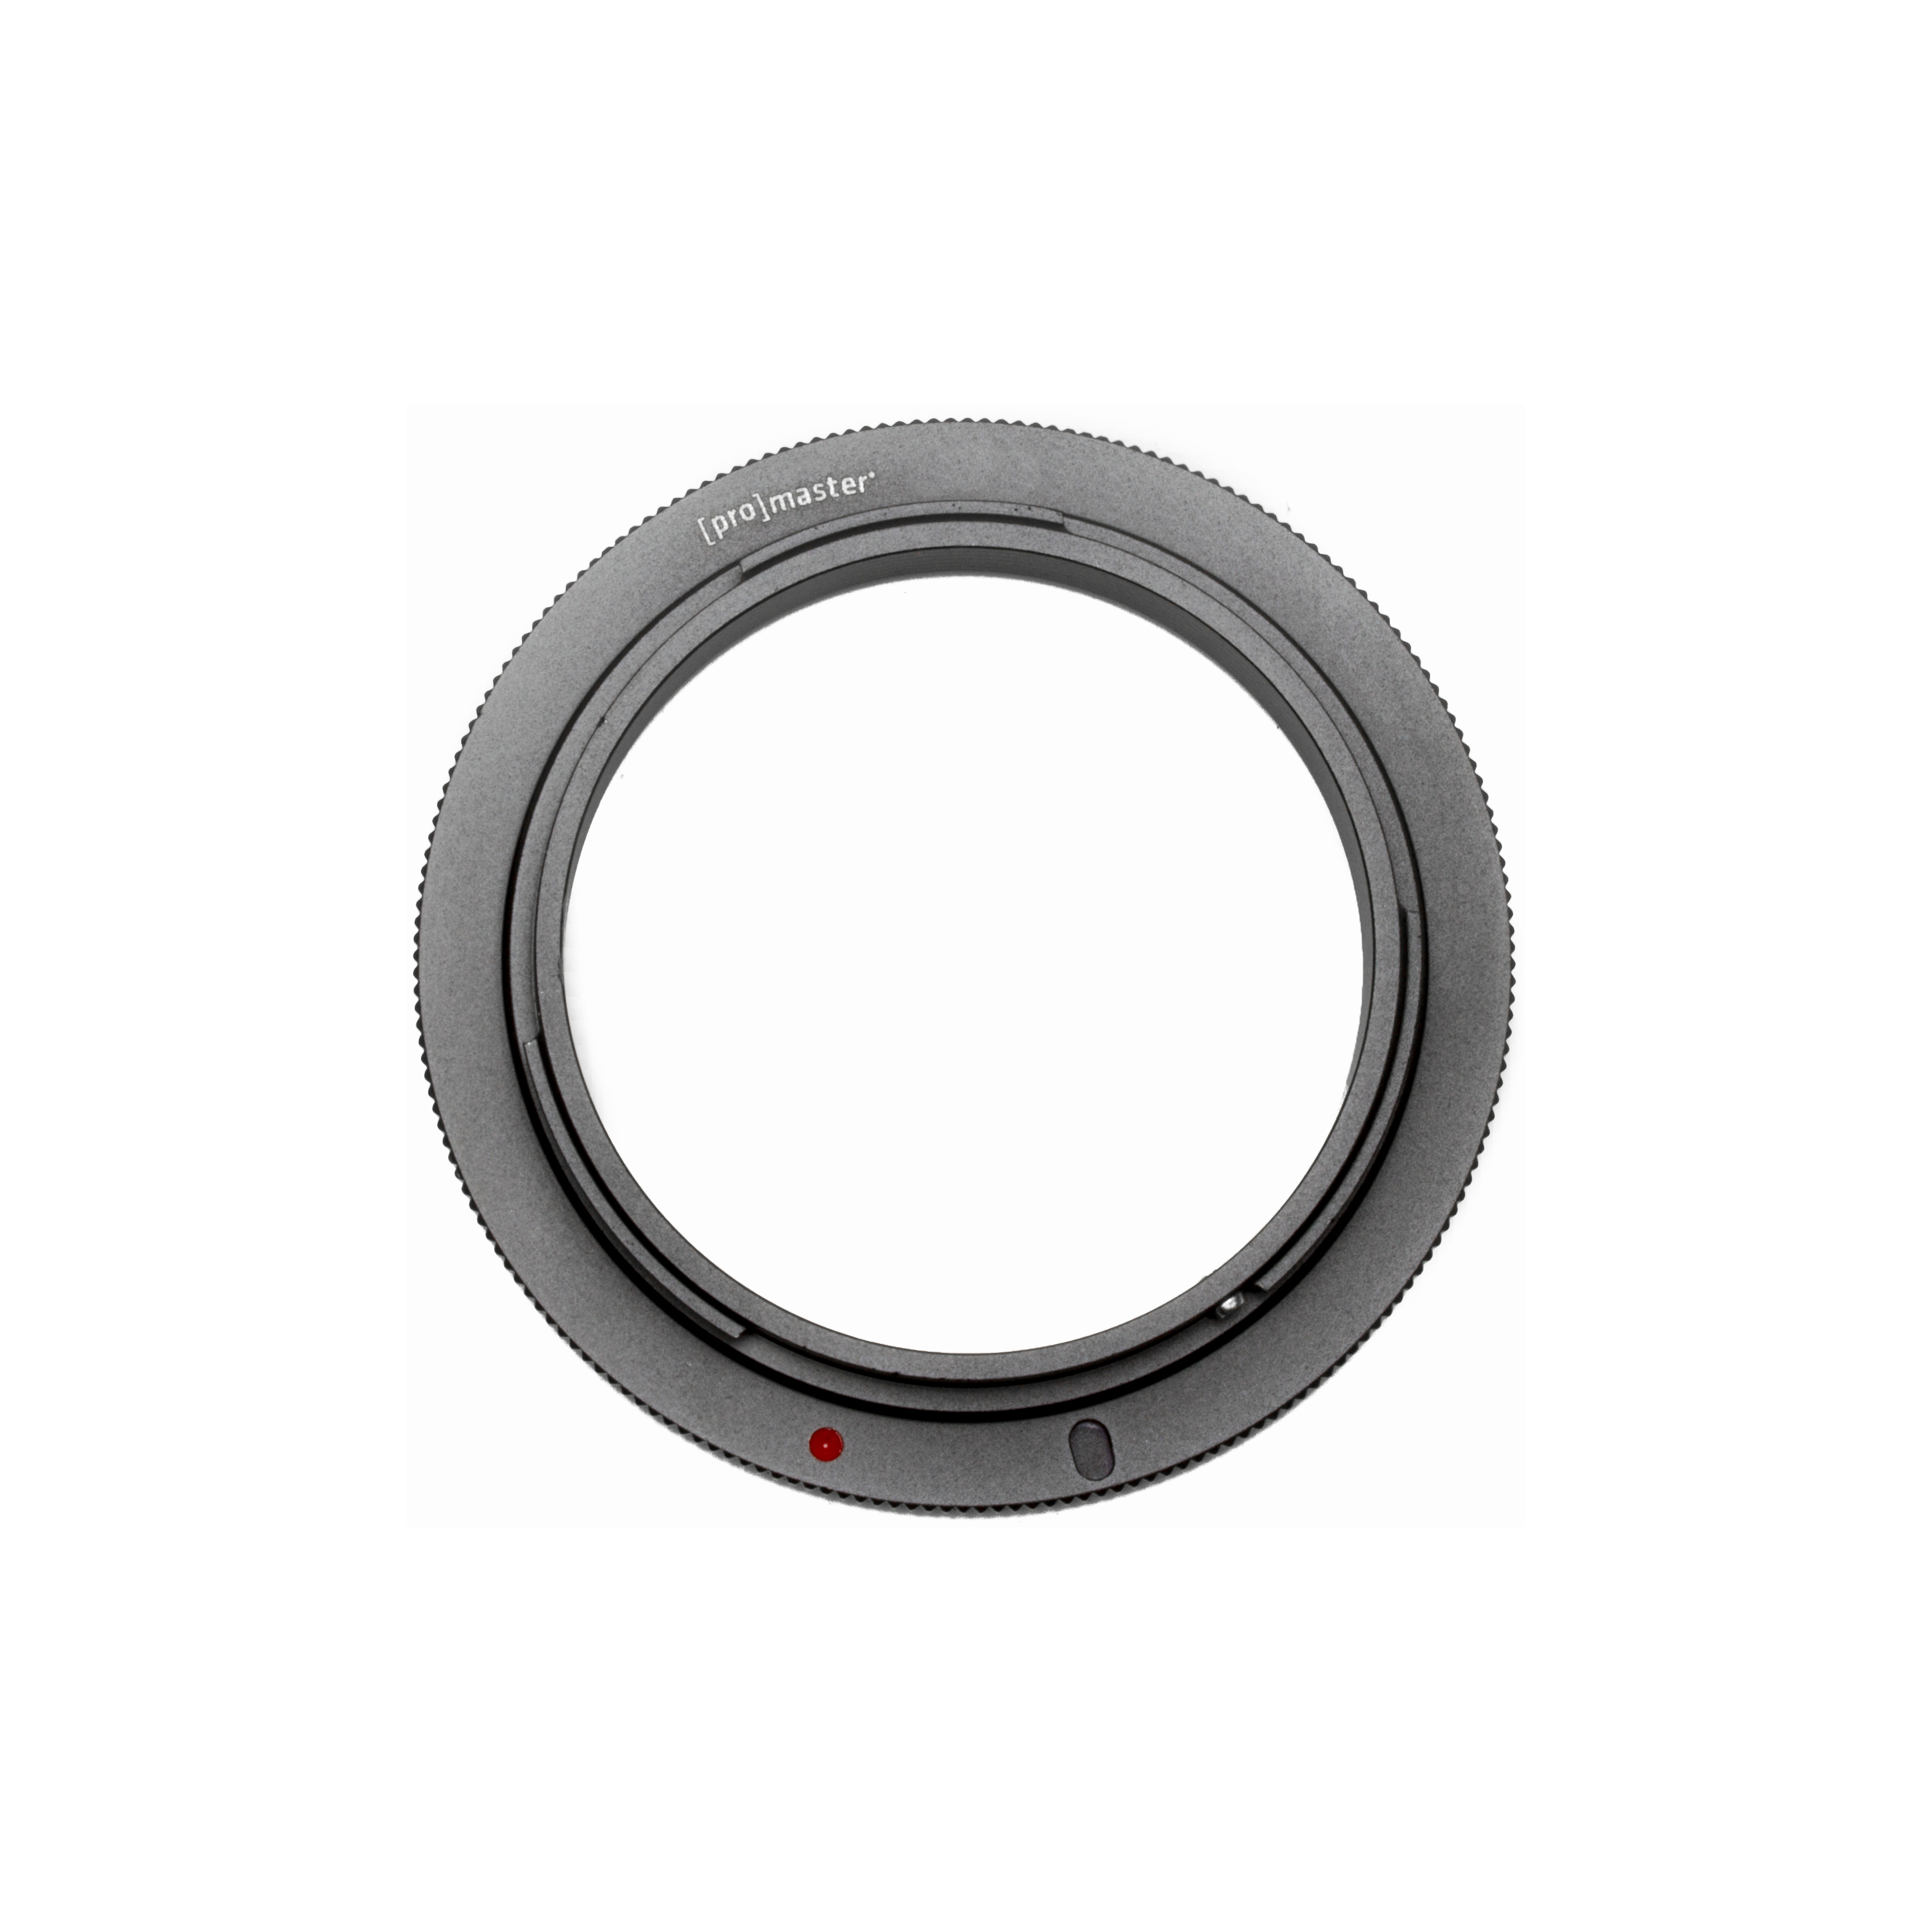 Promaster 6644 Reverse Ring - 58mm Canon